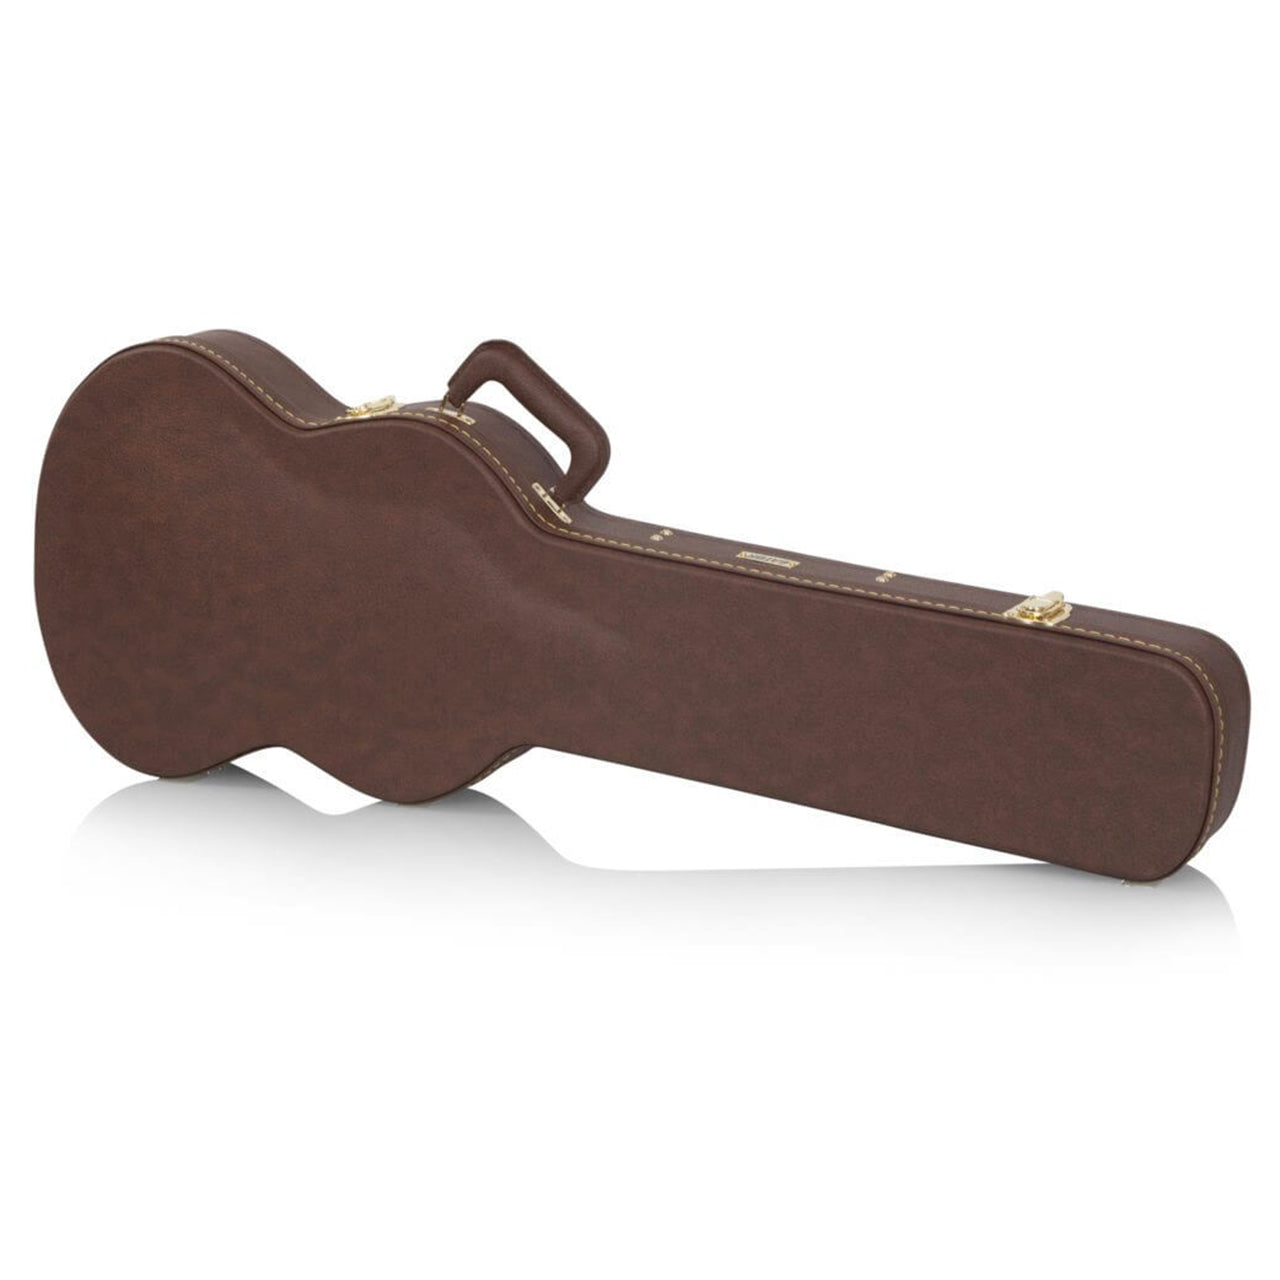 Gator Deluxe Wood Series Gibson SG Electric Guitar Case, Brown